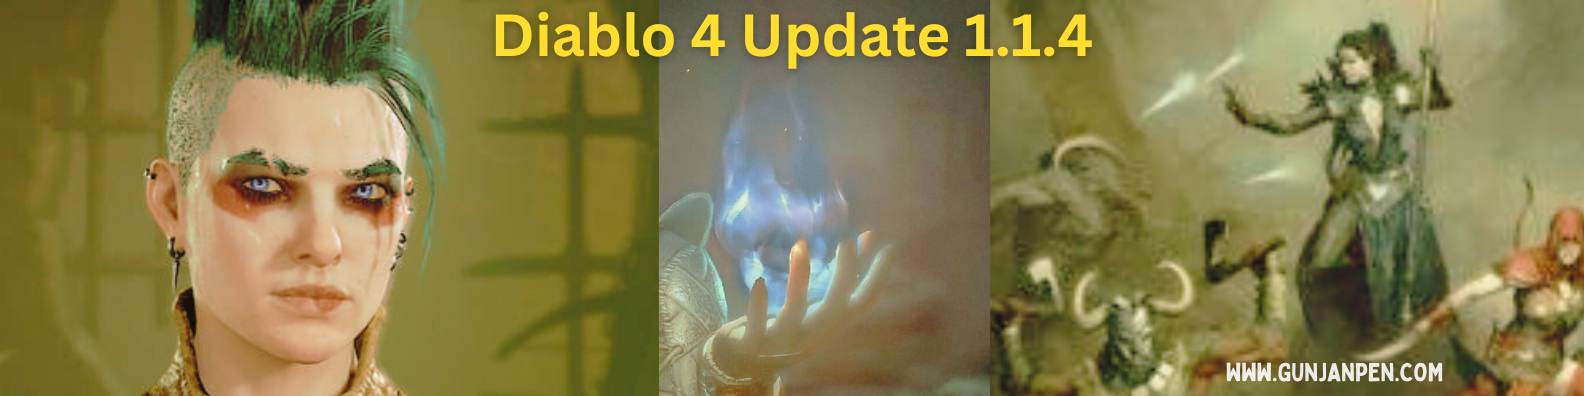 Diablo 4 Update 1.1.4: What's New in the Latest Release?